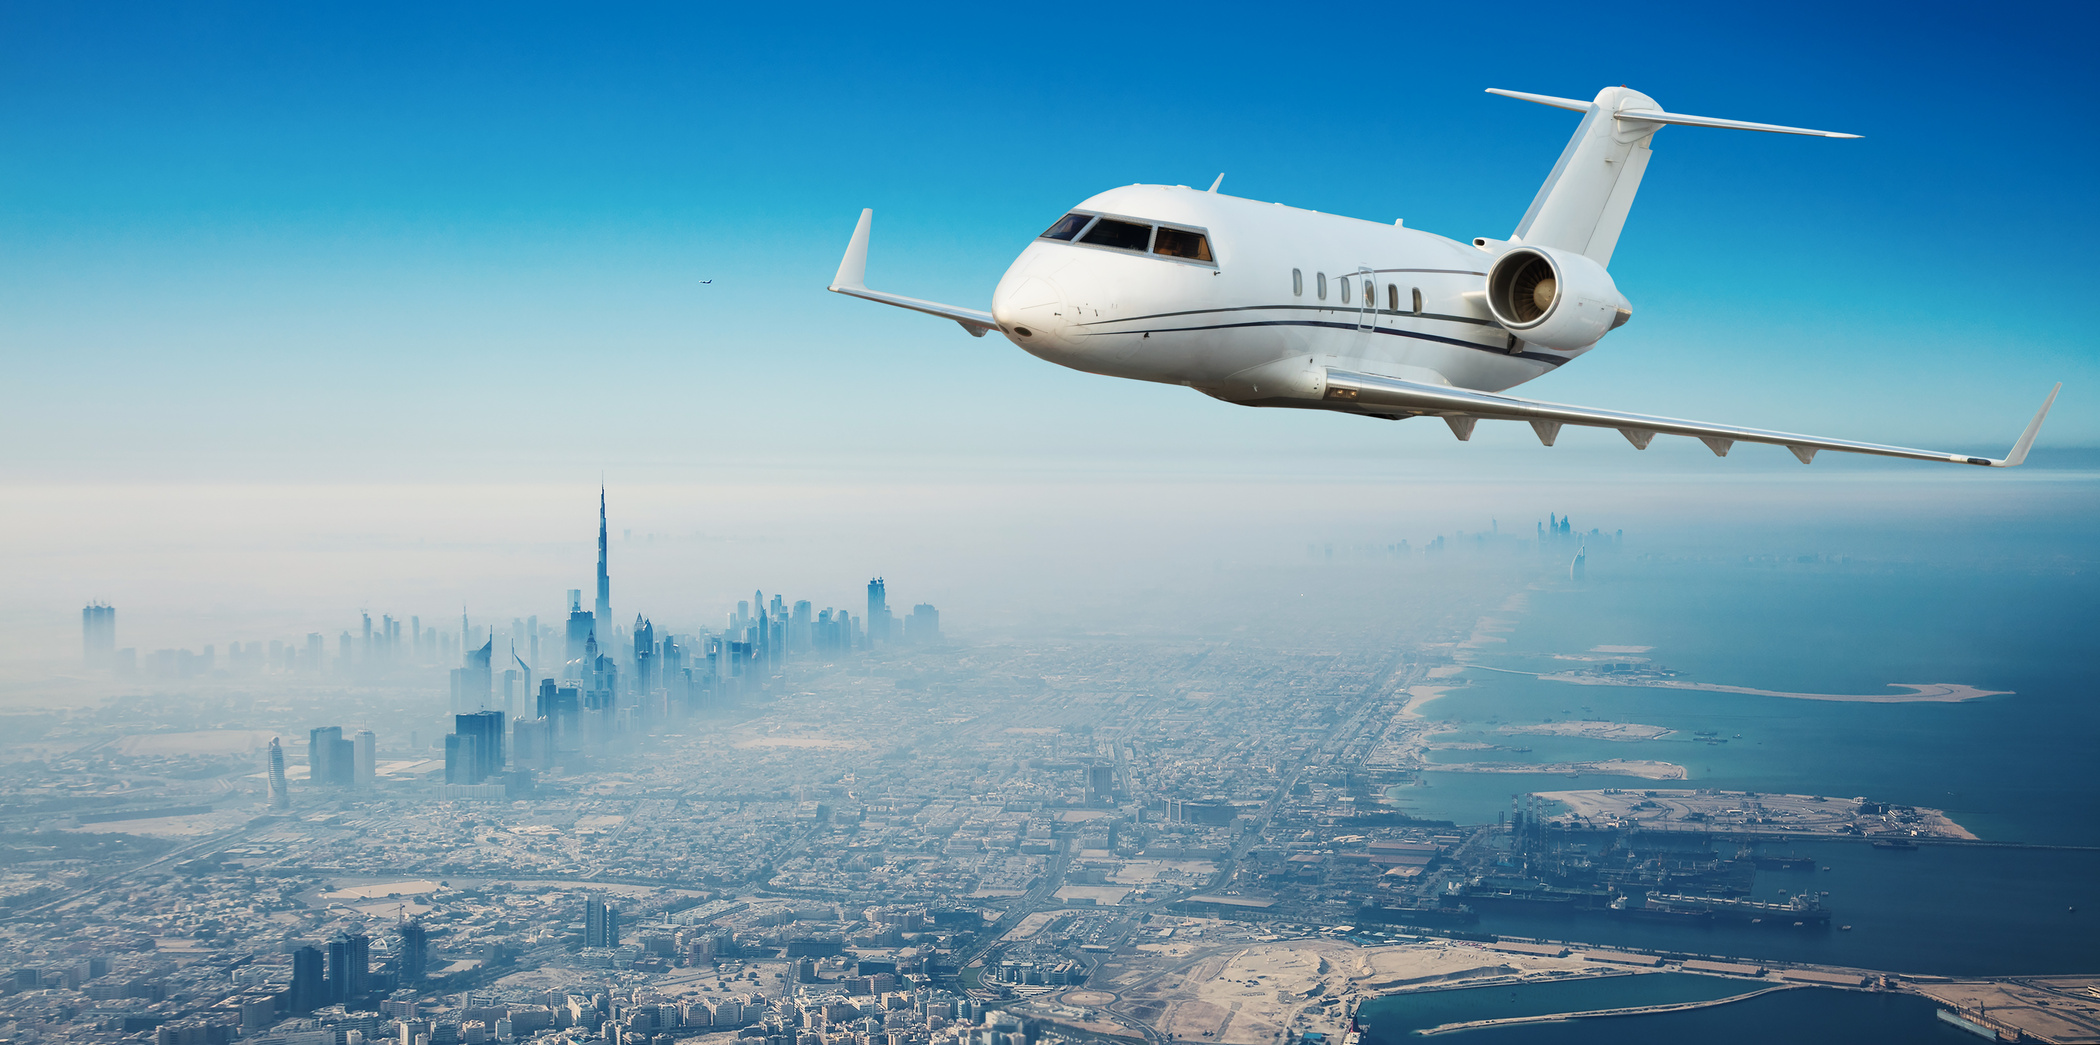 Discover all the shipments taken care of by traveling by private plane.